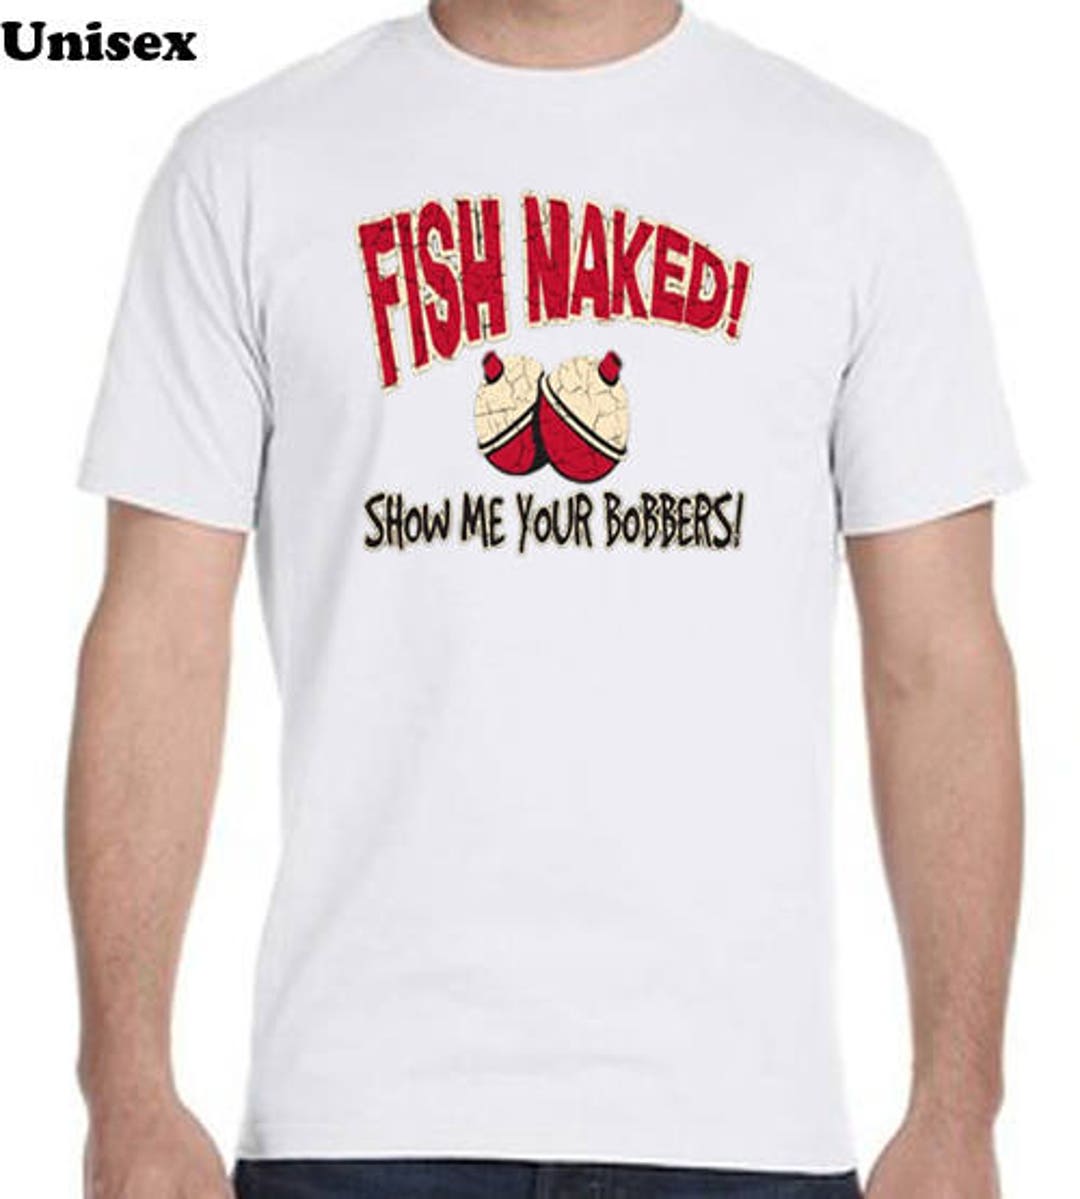 Fish Naked, Show Me Your Bobbers Fishing Tee-shirt, Fishing Tee Shirt,  Funny Tee Shirt, Gifts for Him, Gifts for Christmas -  Canada